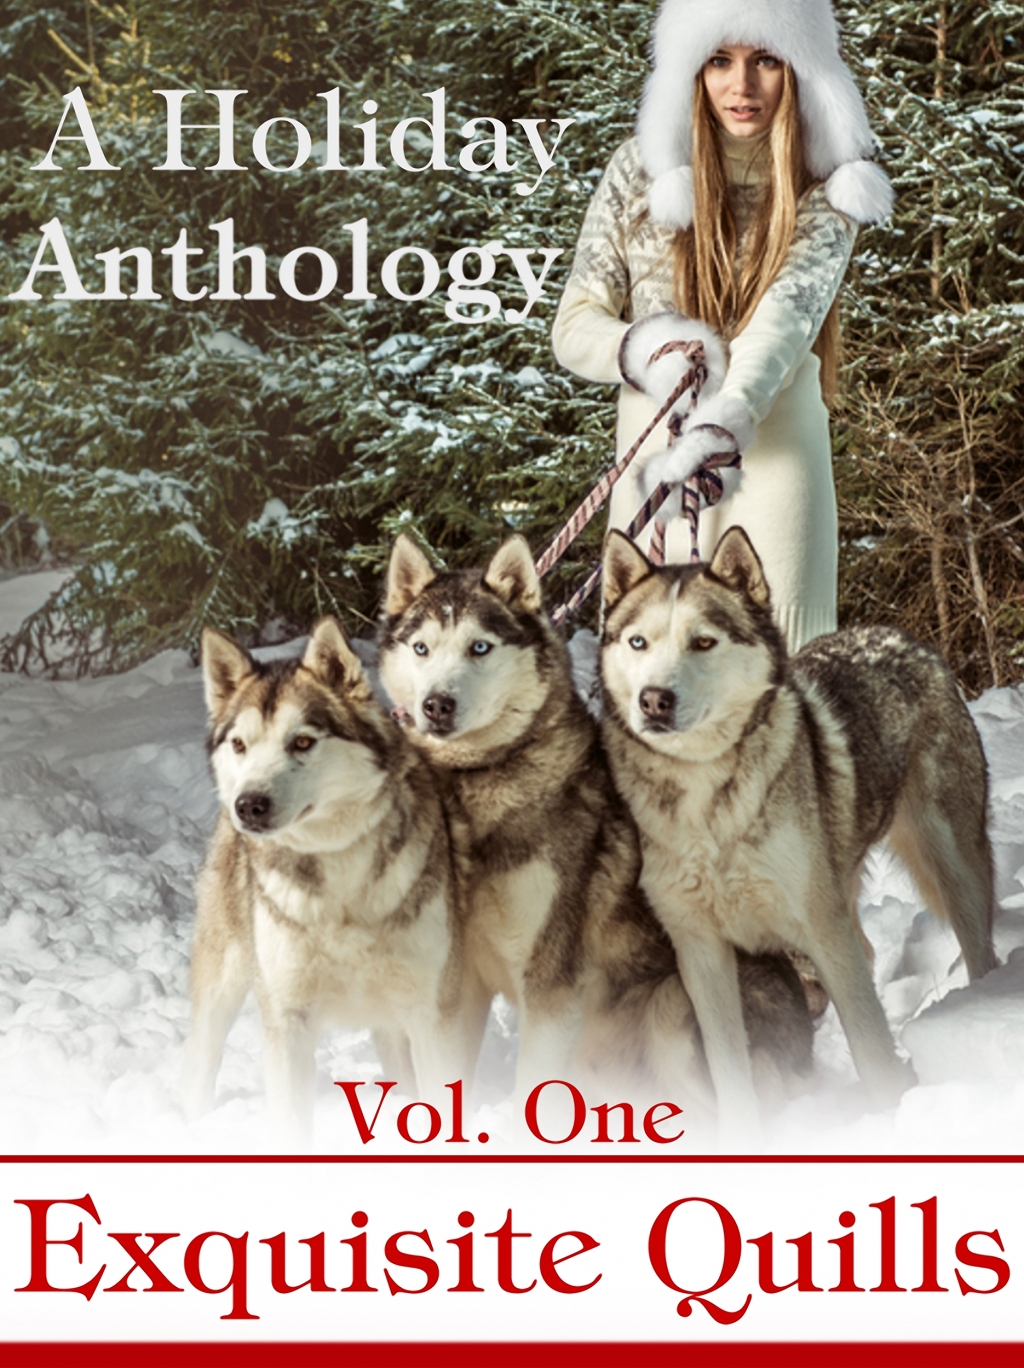 Winter is coming…!  An anthology of heart-warming stories for those dark nights